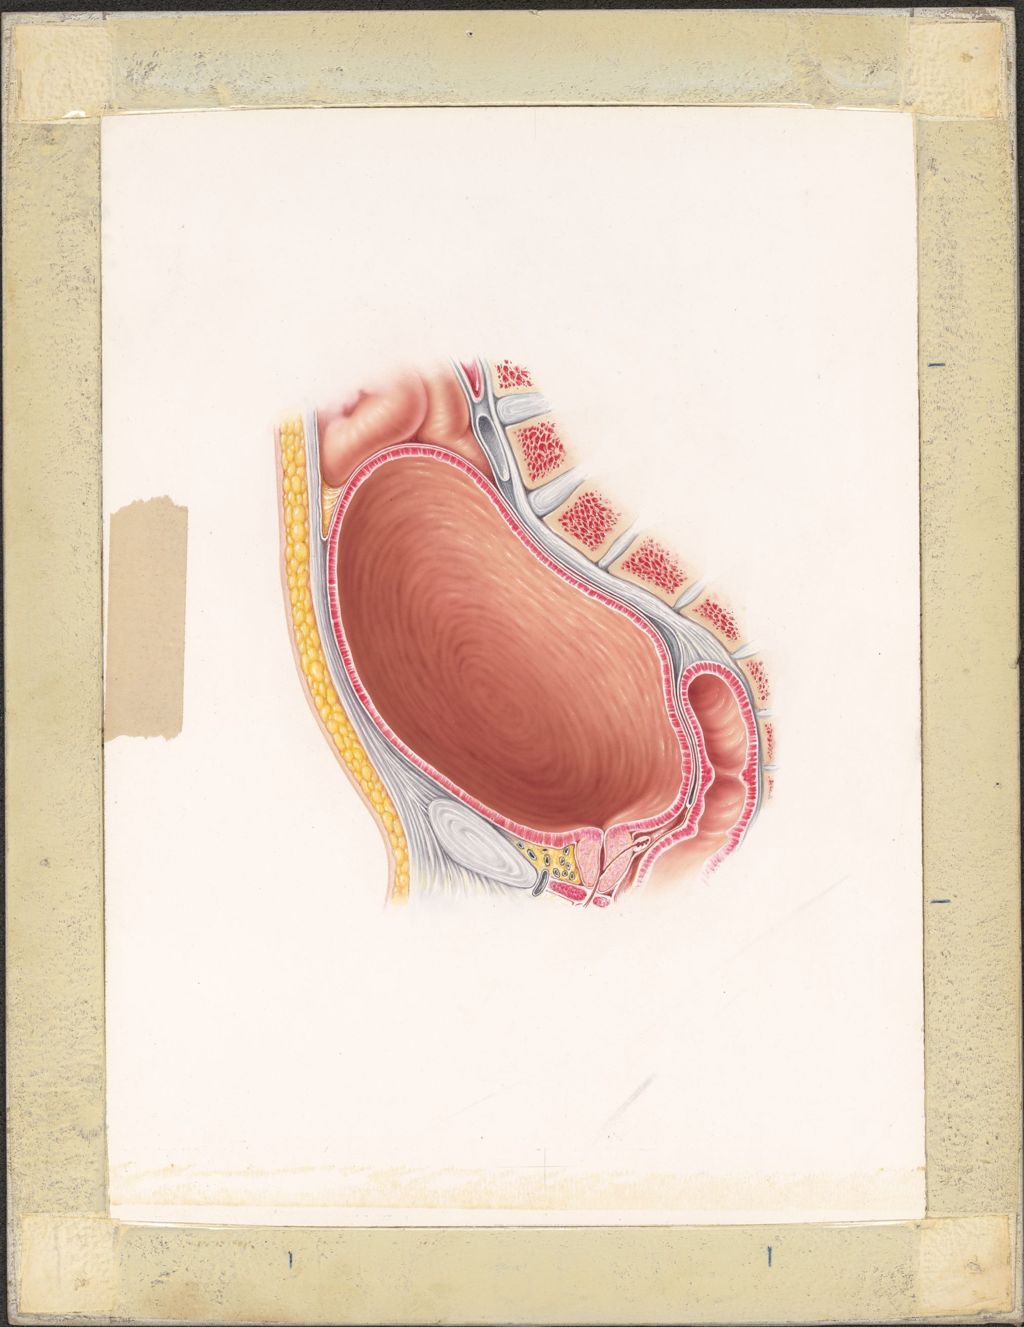 Miniature of Distended Bladder, Urinary Retention